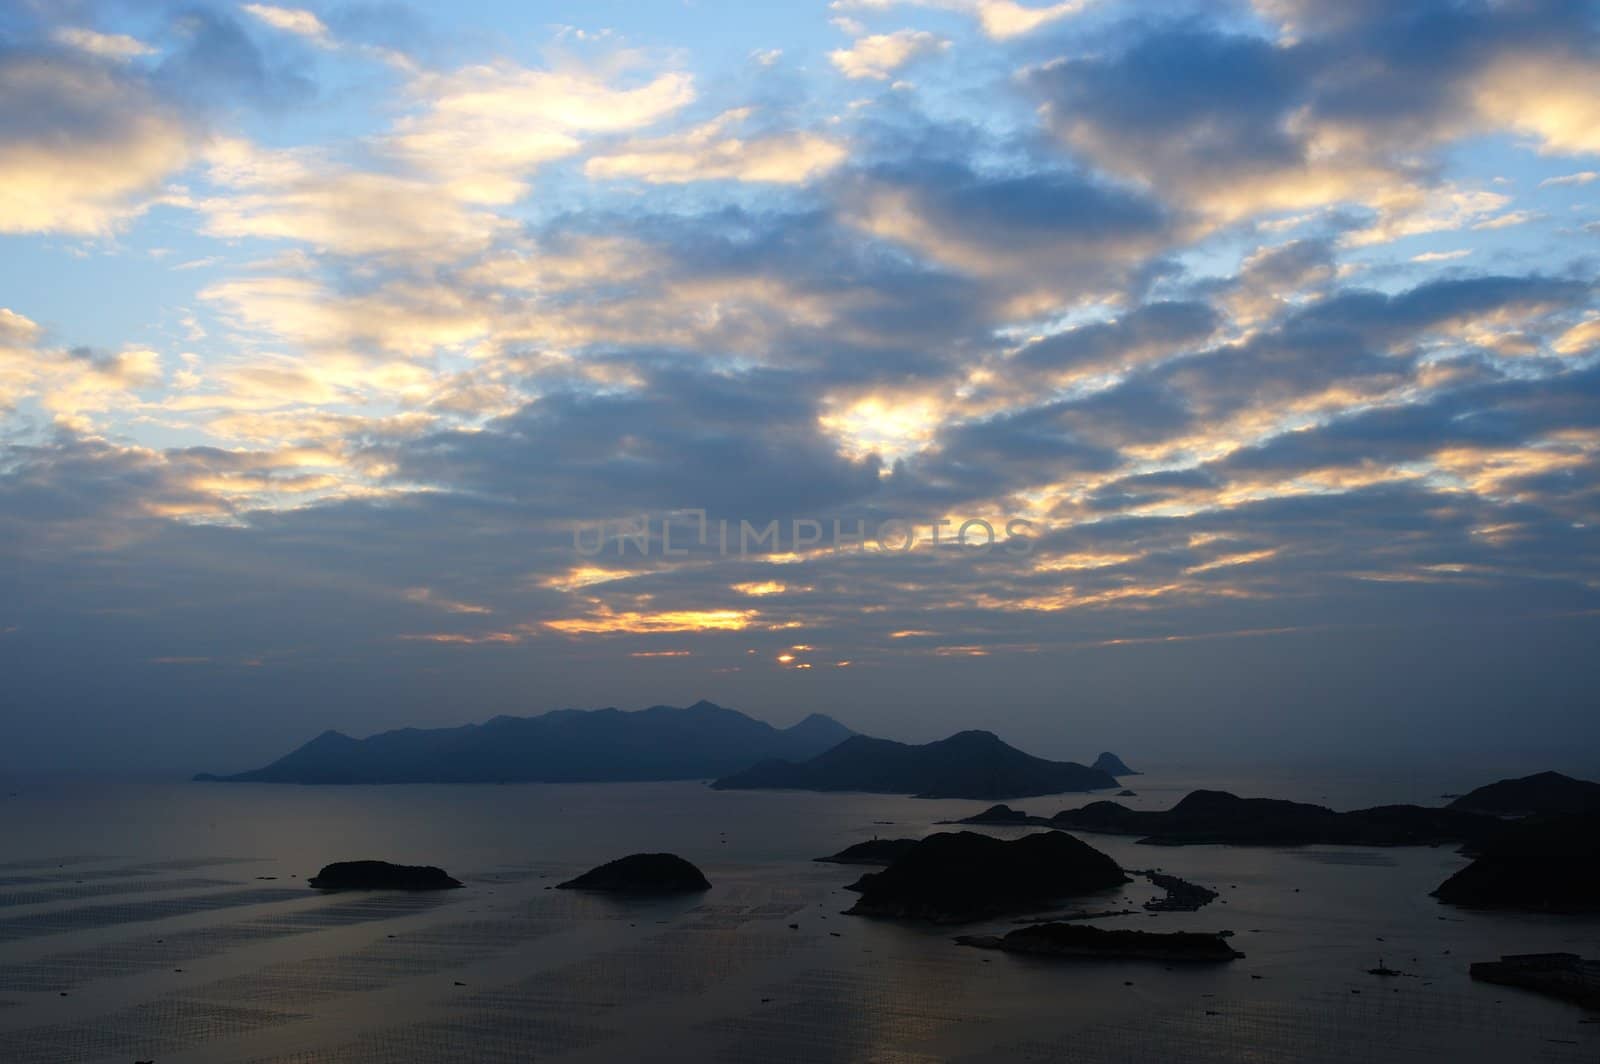 Ocean landscape with islands and mountains, photo taken in Fujian province of China